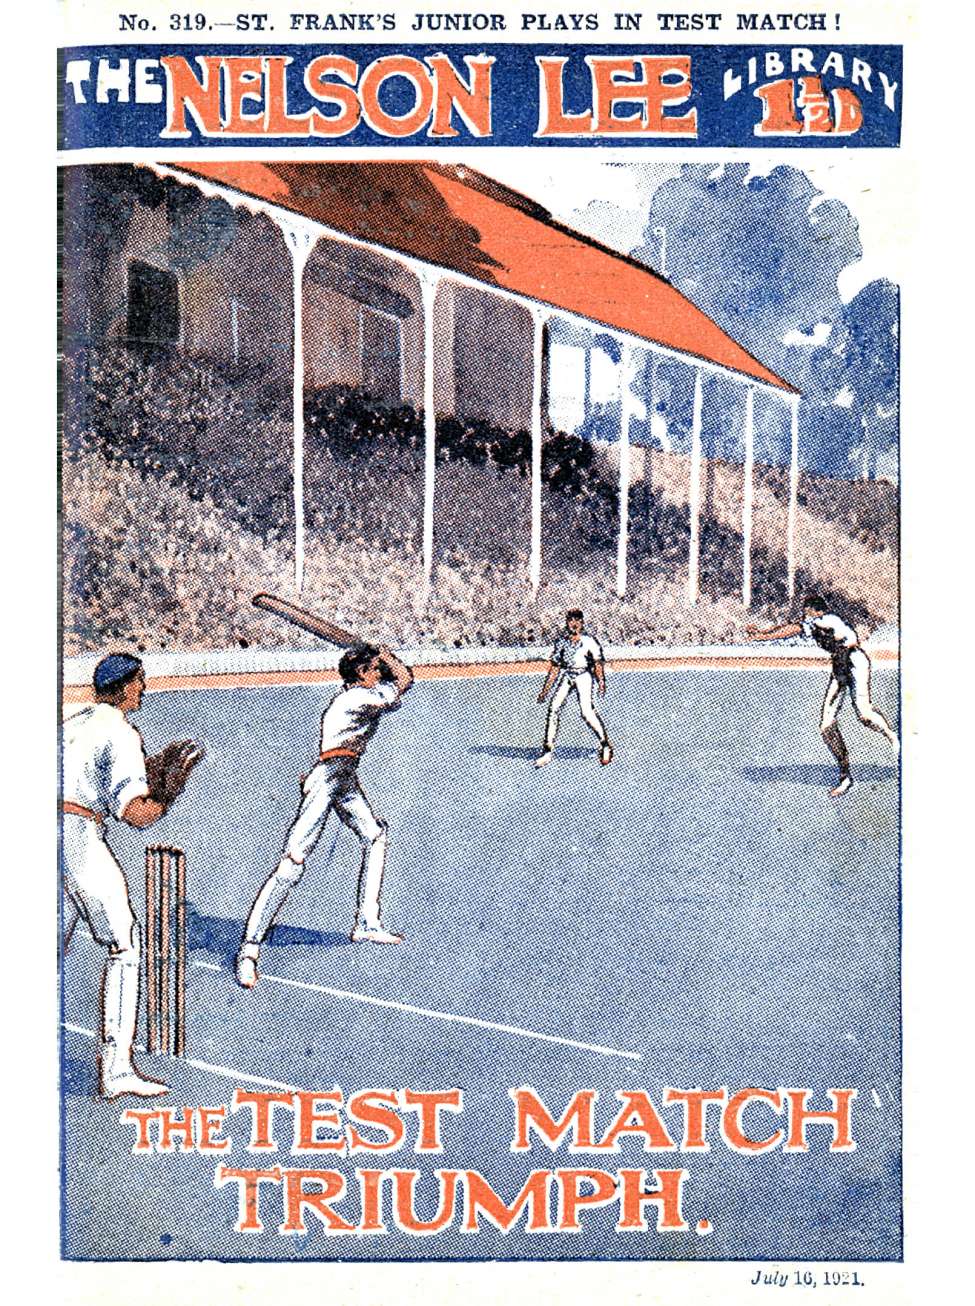 Book Cover For Nelson Lee Library s1 319 - The Test Match Triumph